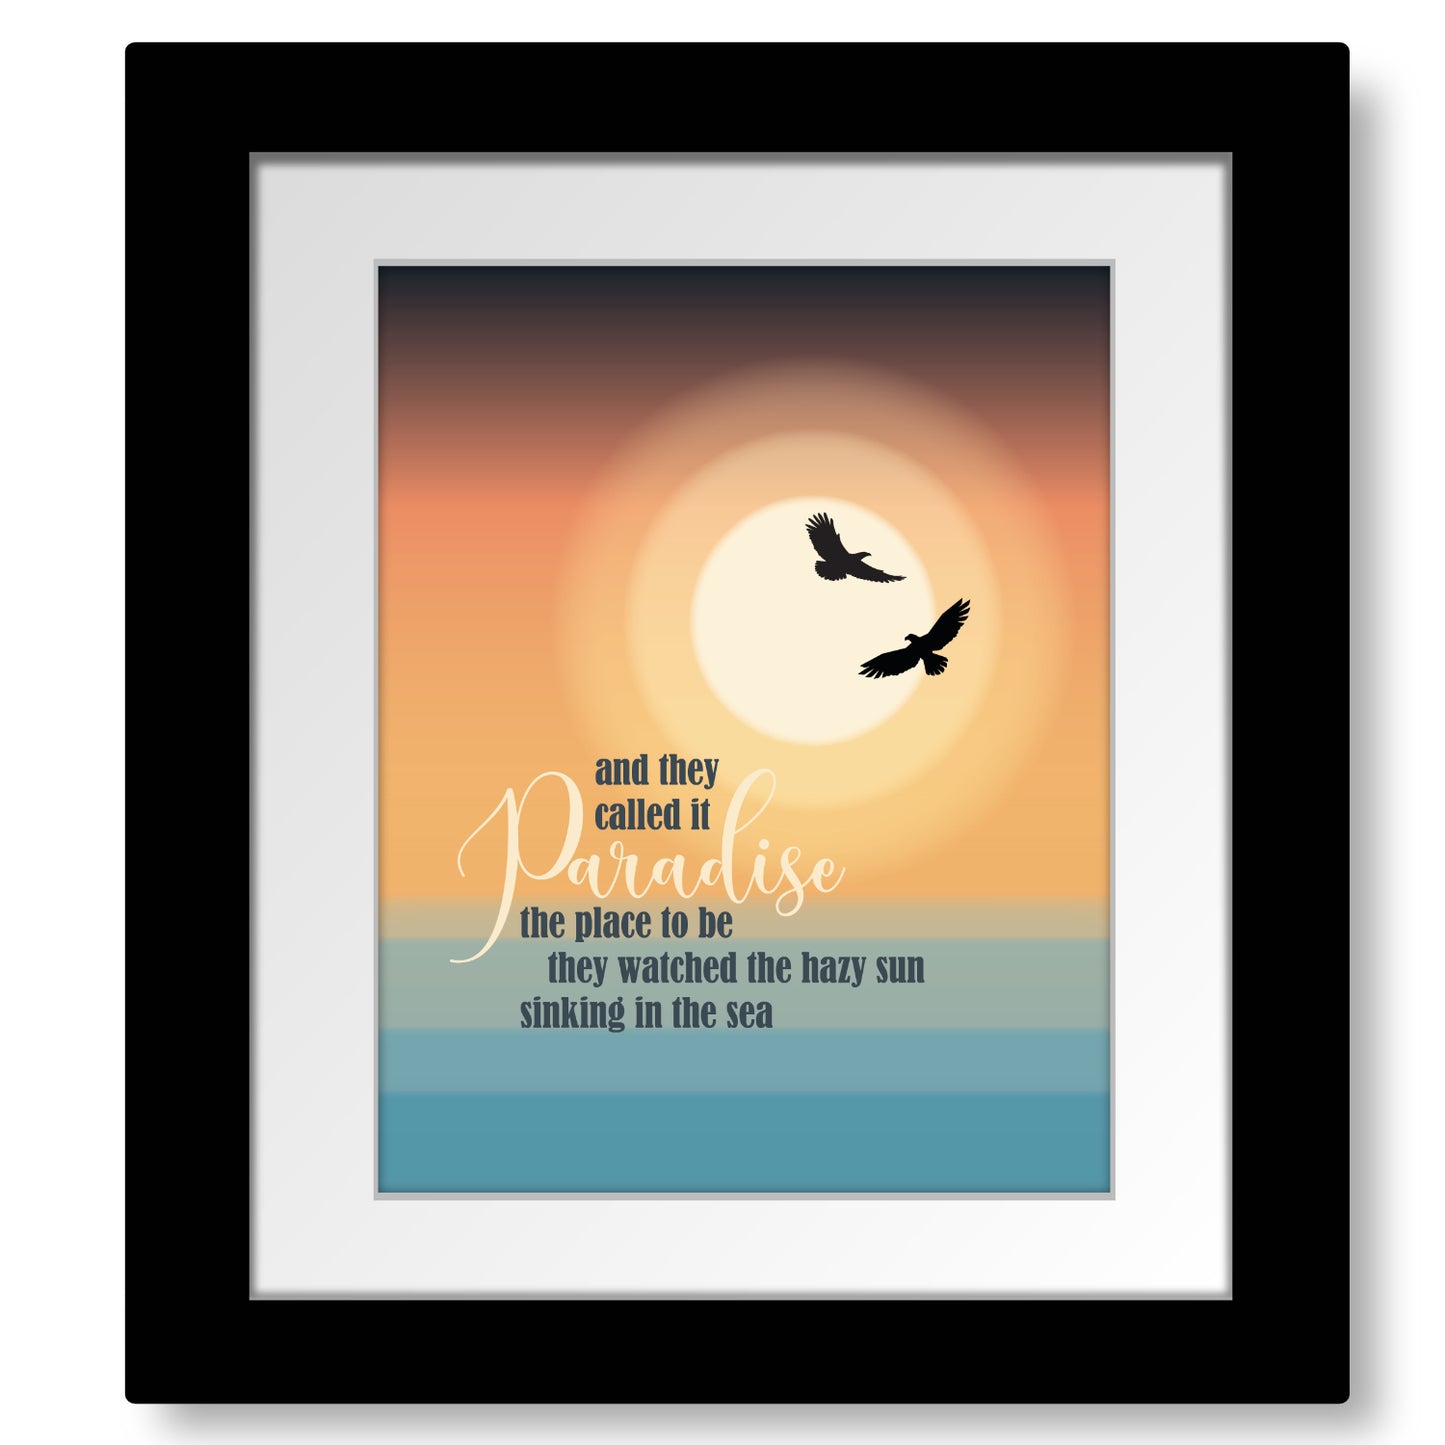 The Last Resort by the Eagles - Song Lyric Inspired Art Wall Print Room Aesthetic for Music Gallery